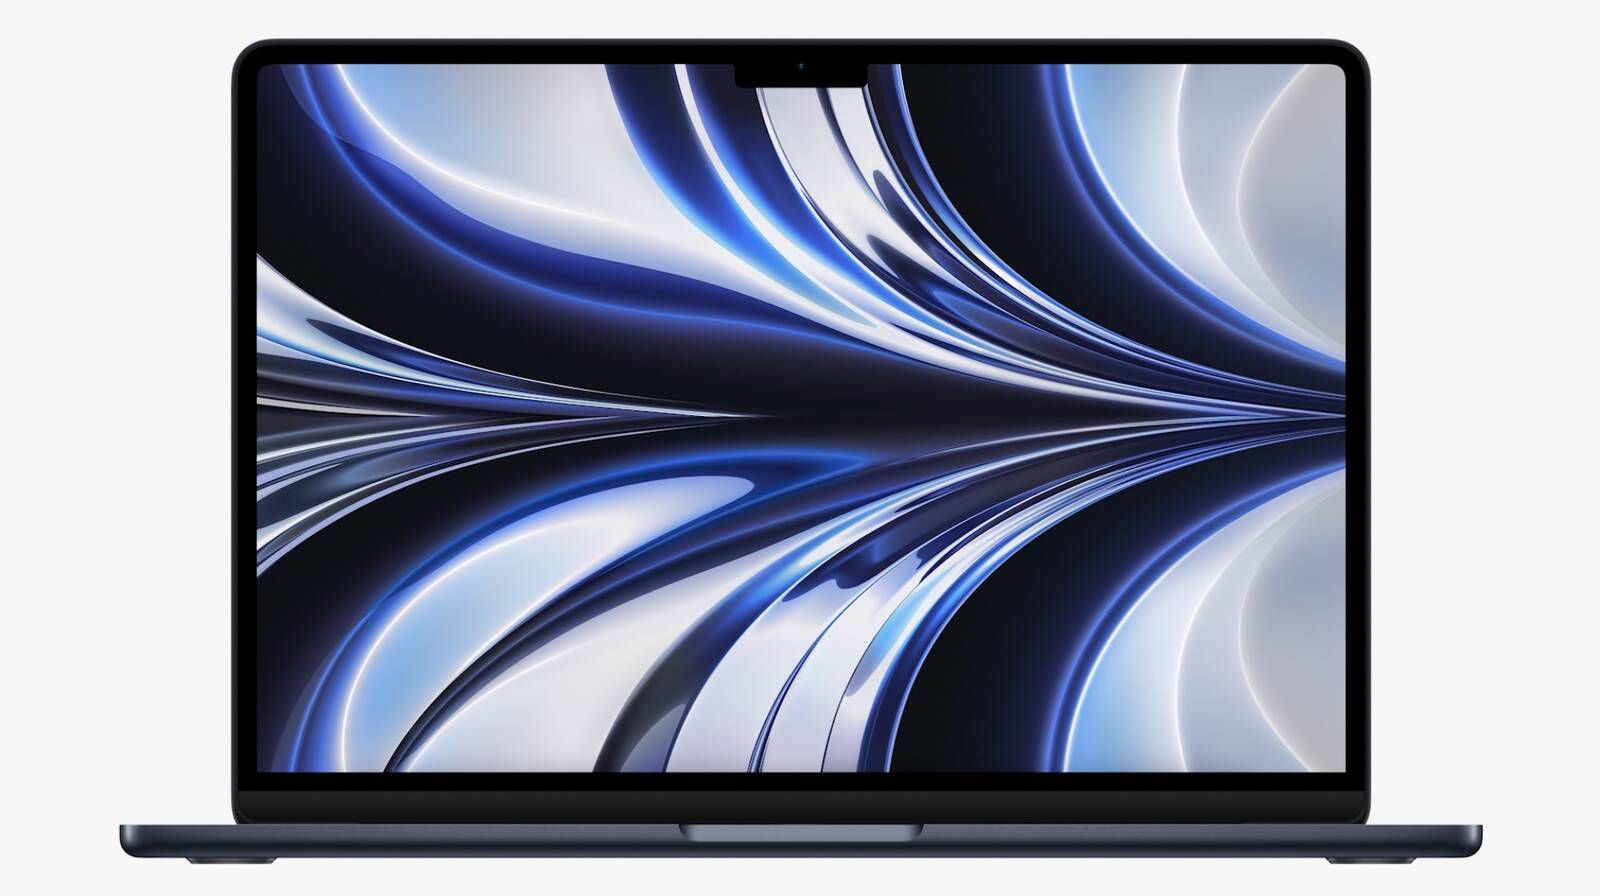 Apple Announces Redesigned MacBook Air With M2 Chip, Notch, MagSafe, New Colors, and More - macrumors.com